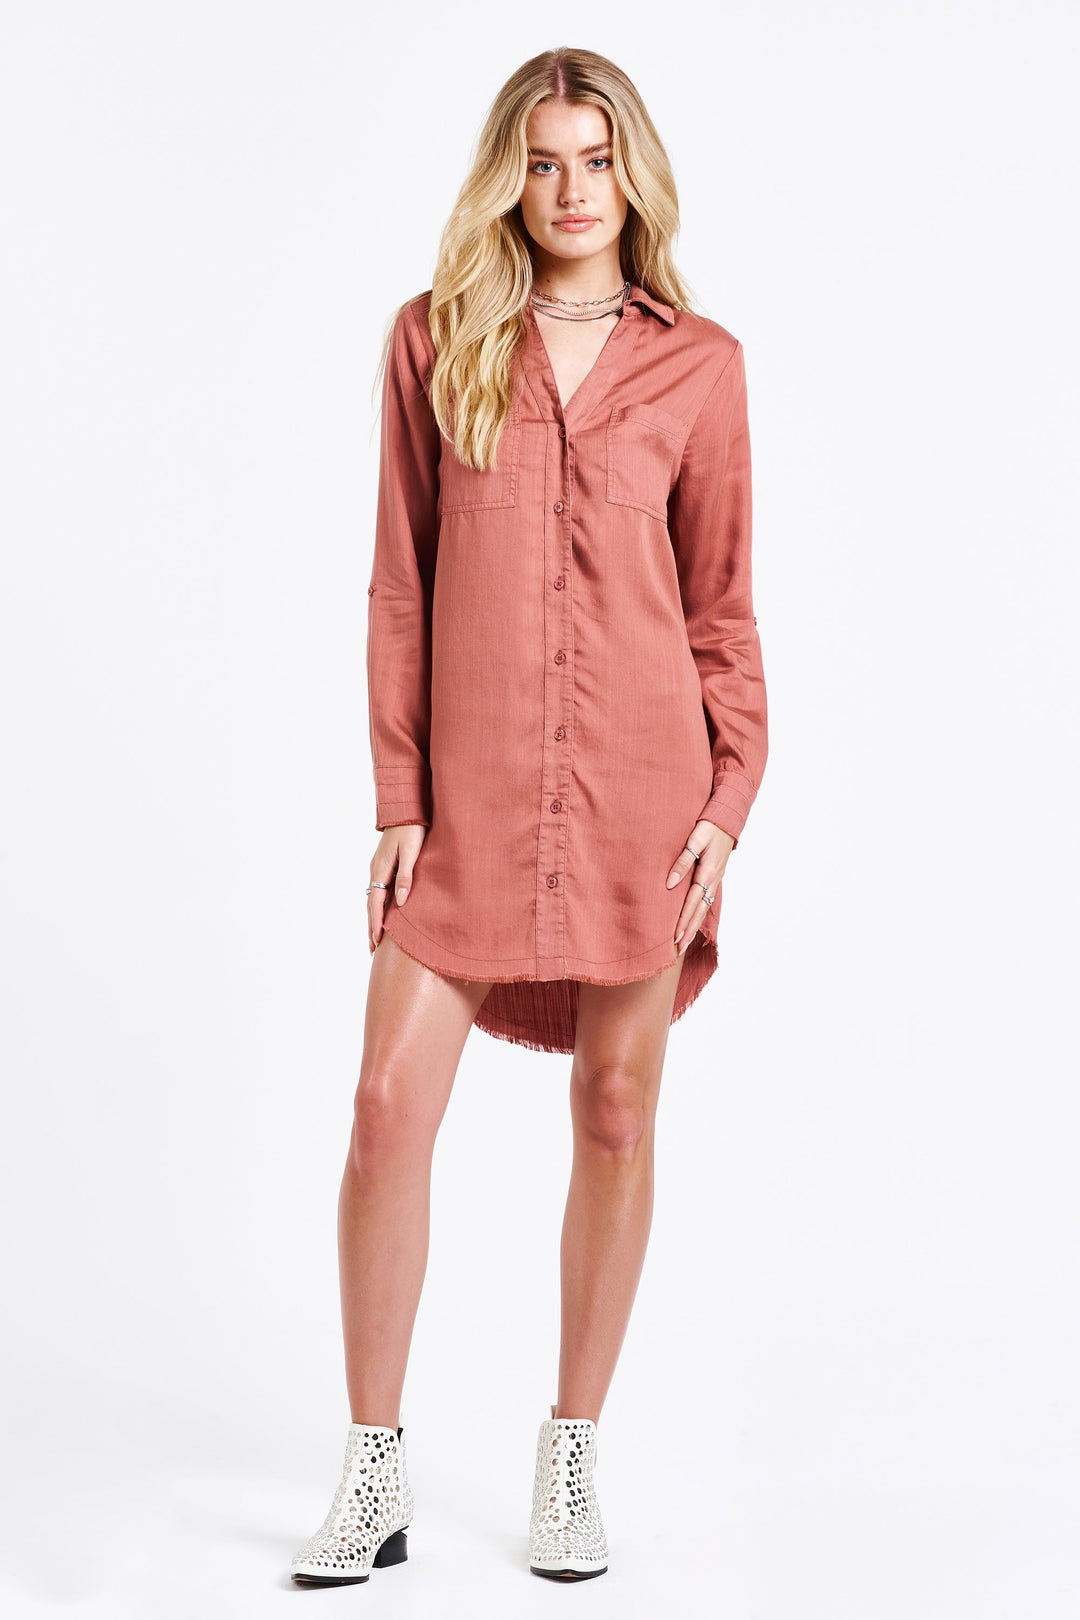 image of a female model wearing a AVERY BUTTON FRONT SHIRT DRESS WISTFUL MAUVE DRESSES